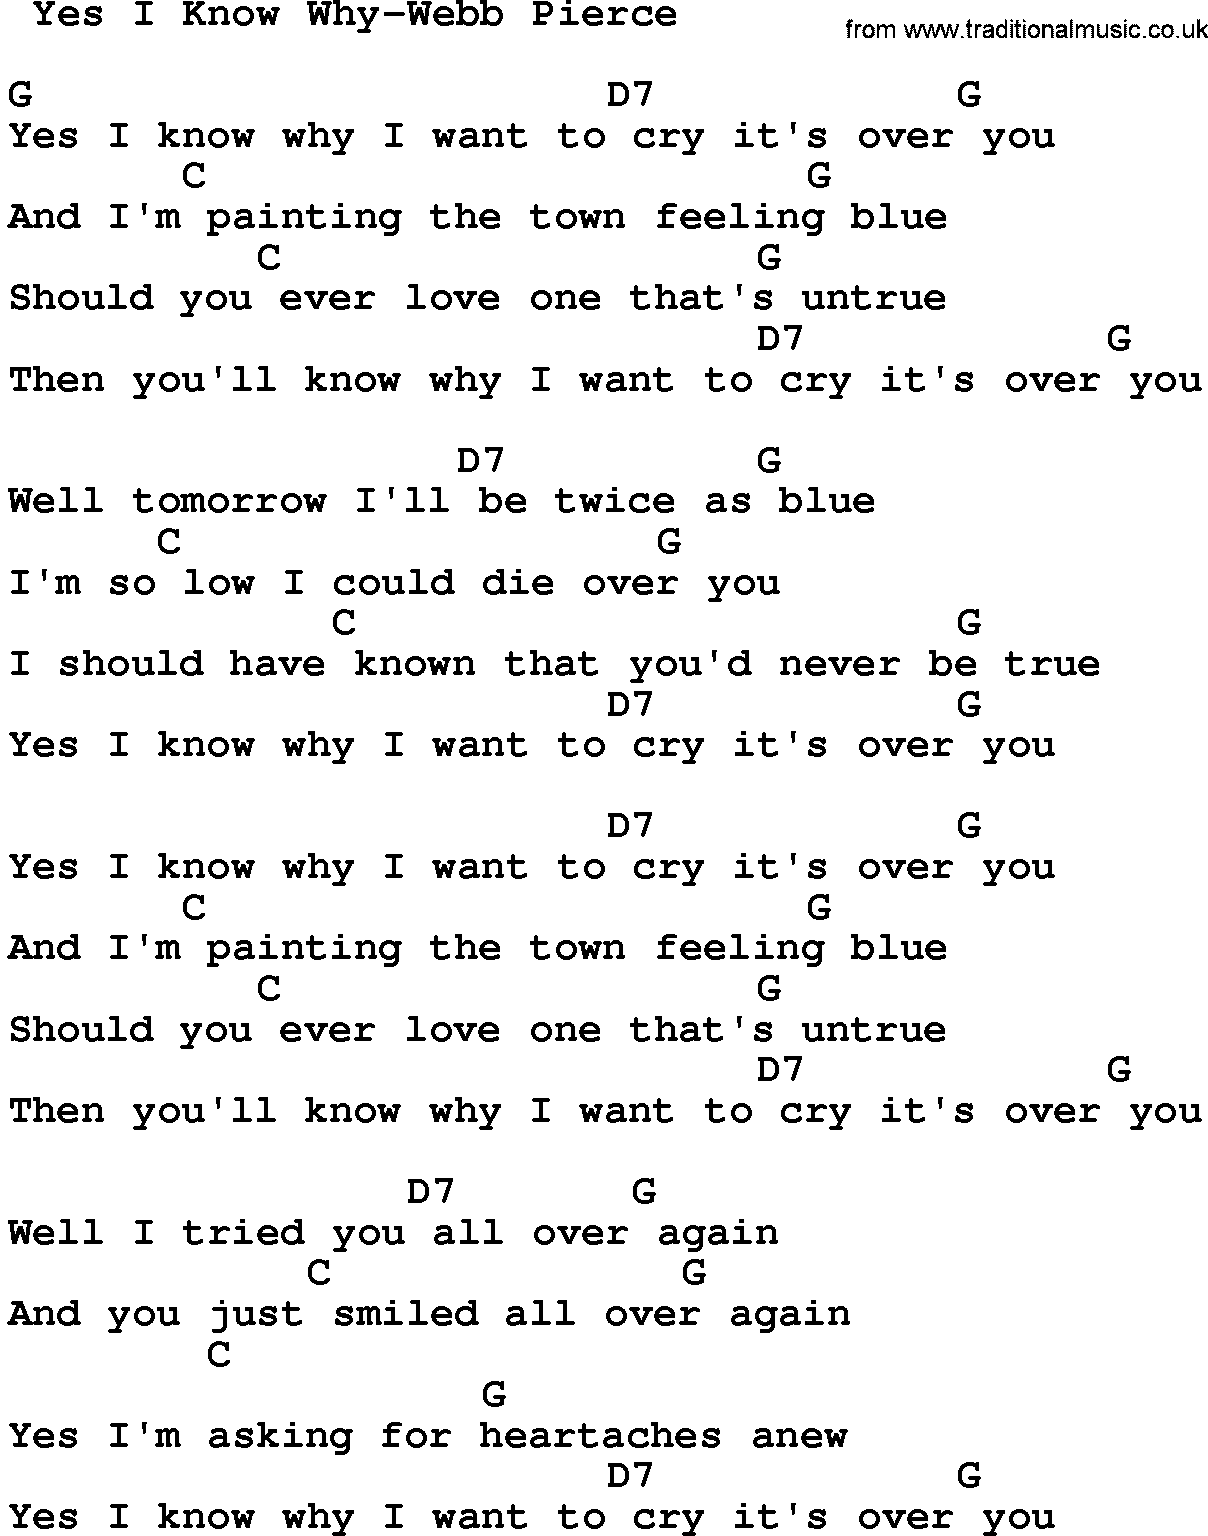 Country music song: Yes I Know Why-Webb Pierce  lyrics and chords